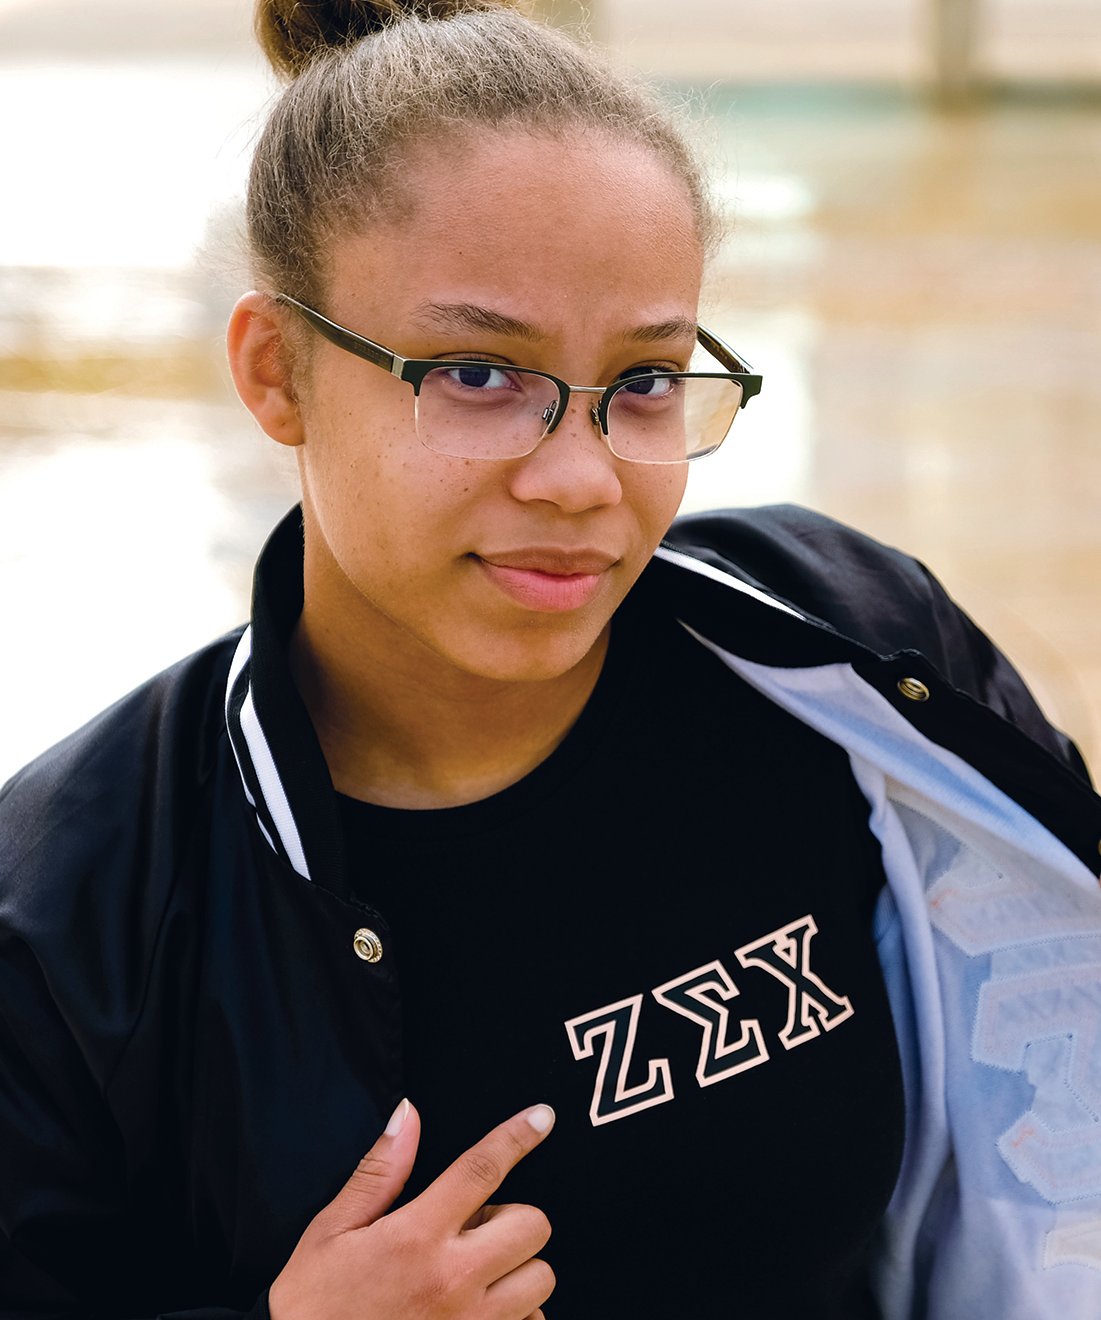 One member of Zeta Sigma Chi sorority looking at camera and pointing to the sorority letters on her shirt